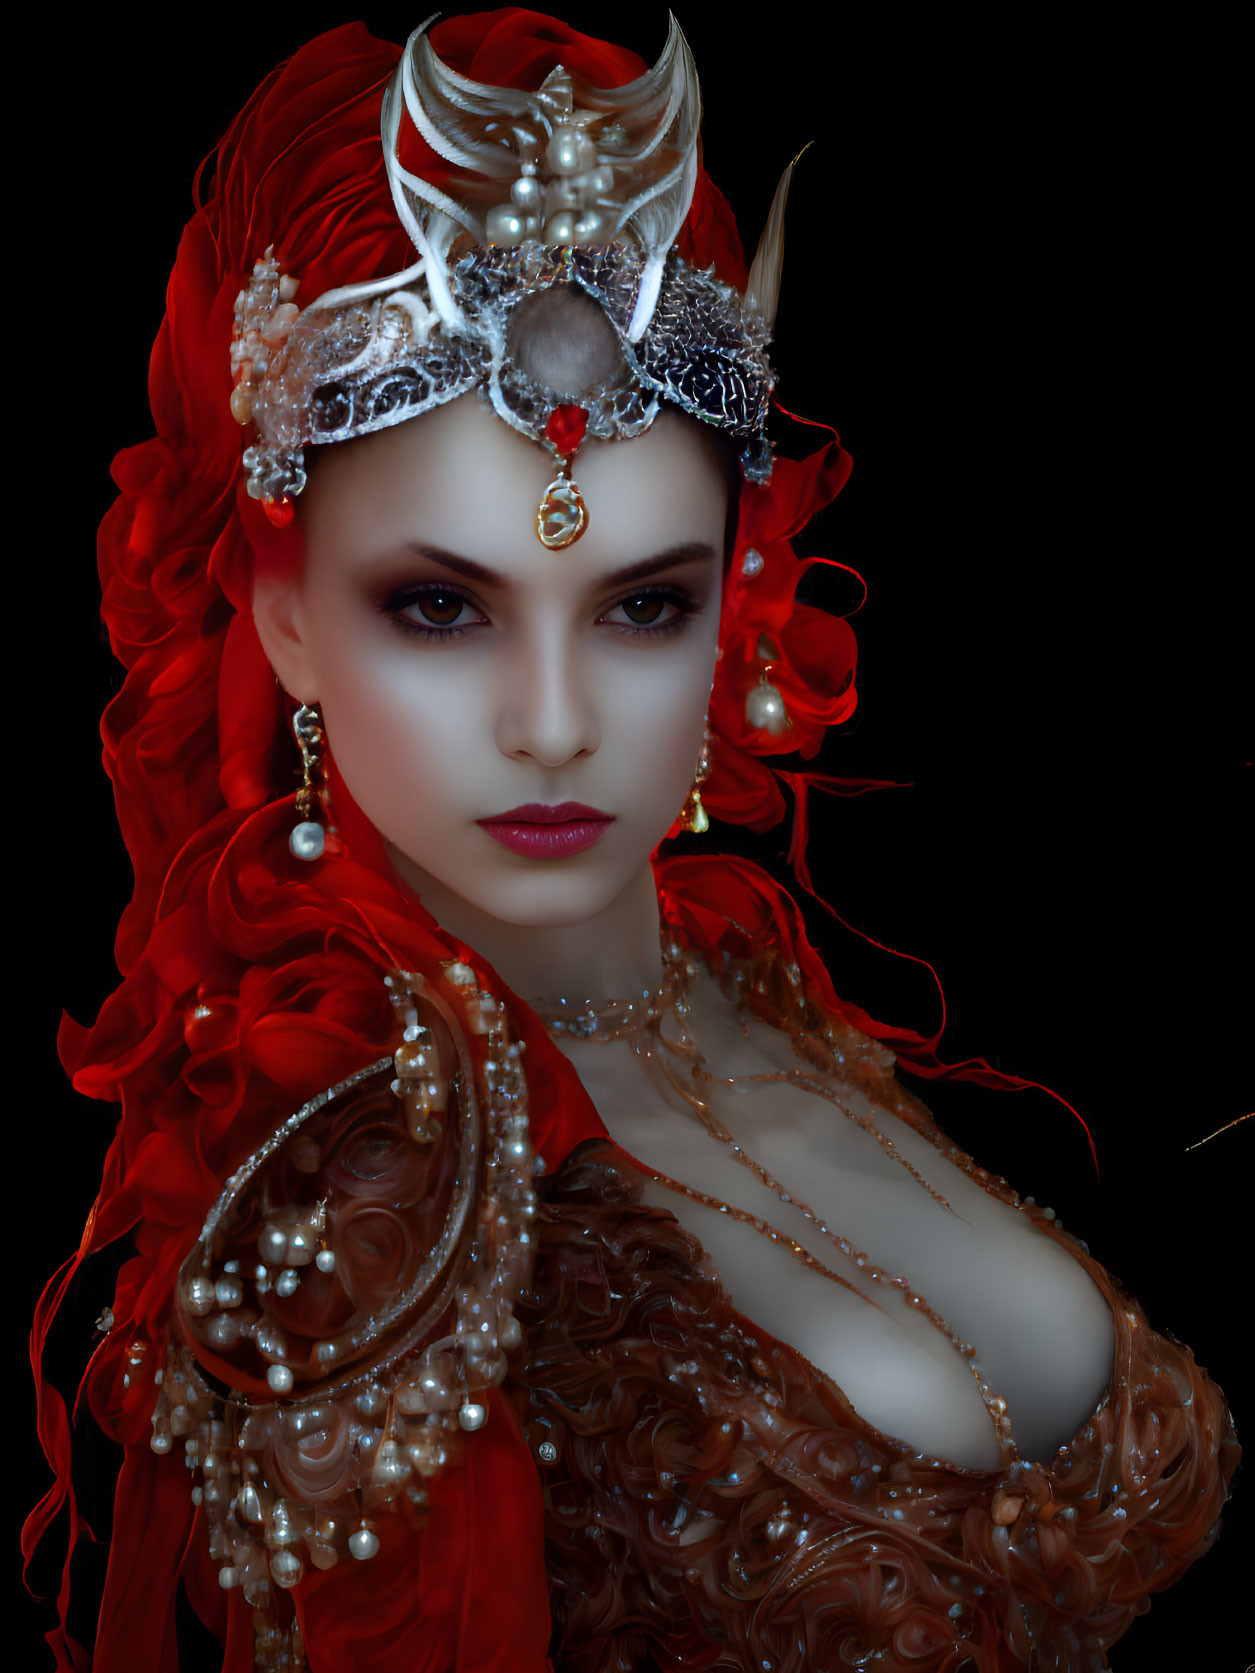 Vibrant red-haired woman in pearl headpiece and dress on black background